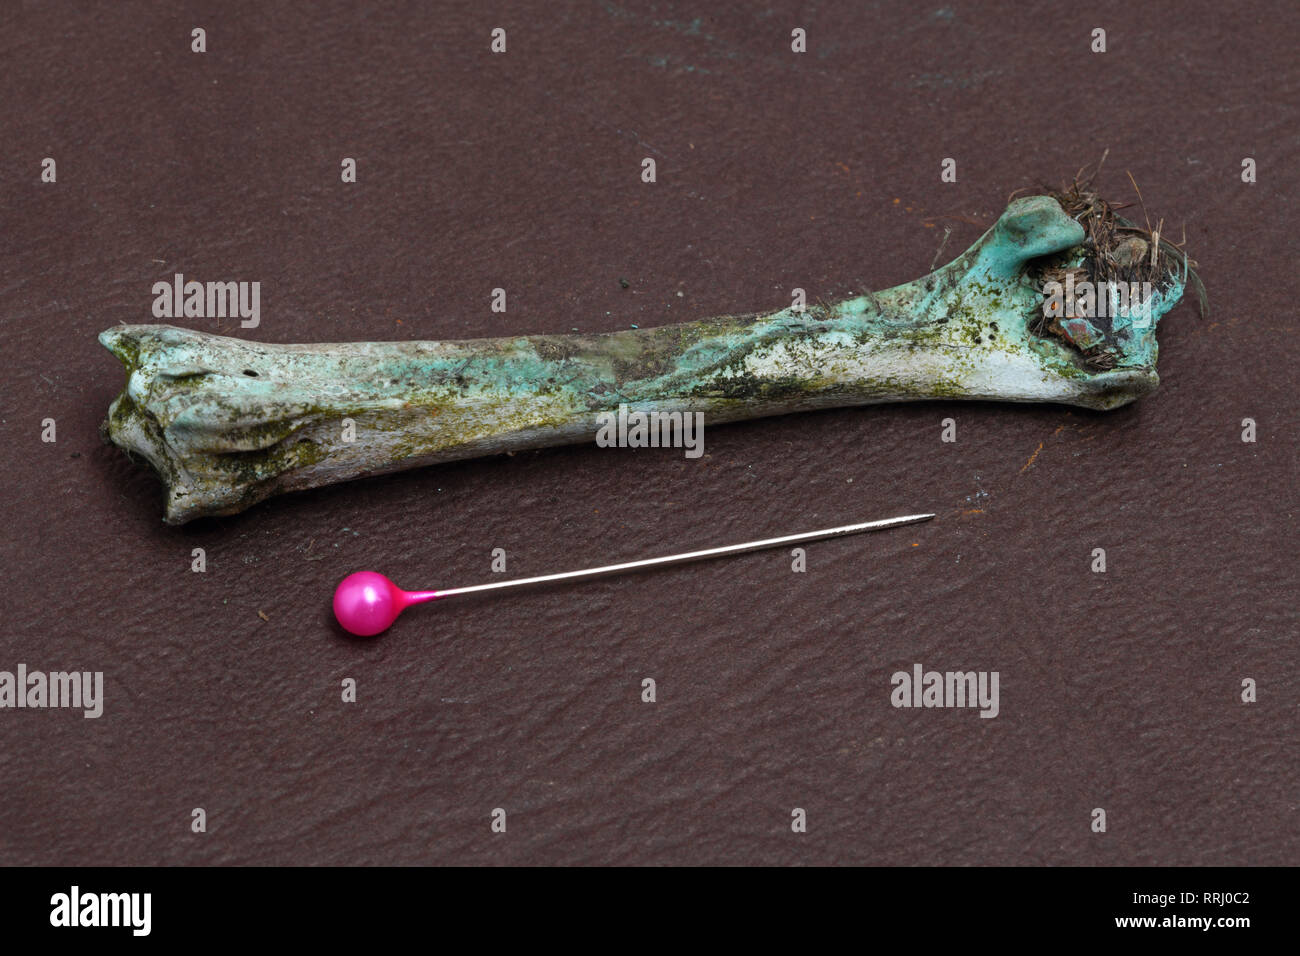 native bird bone impregnated with copper solution in an example of industrial pollution Stock Photo